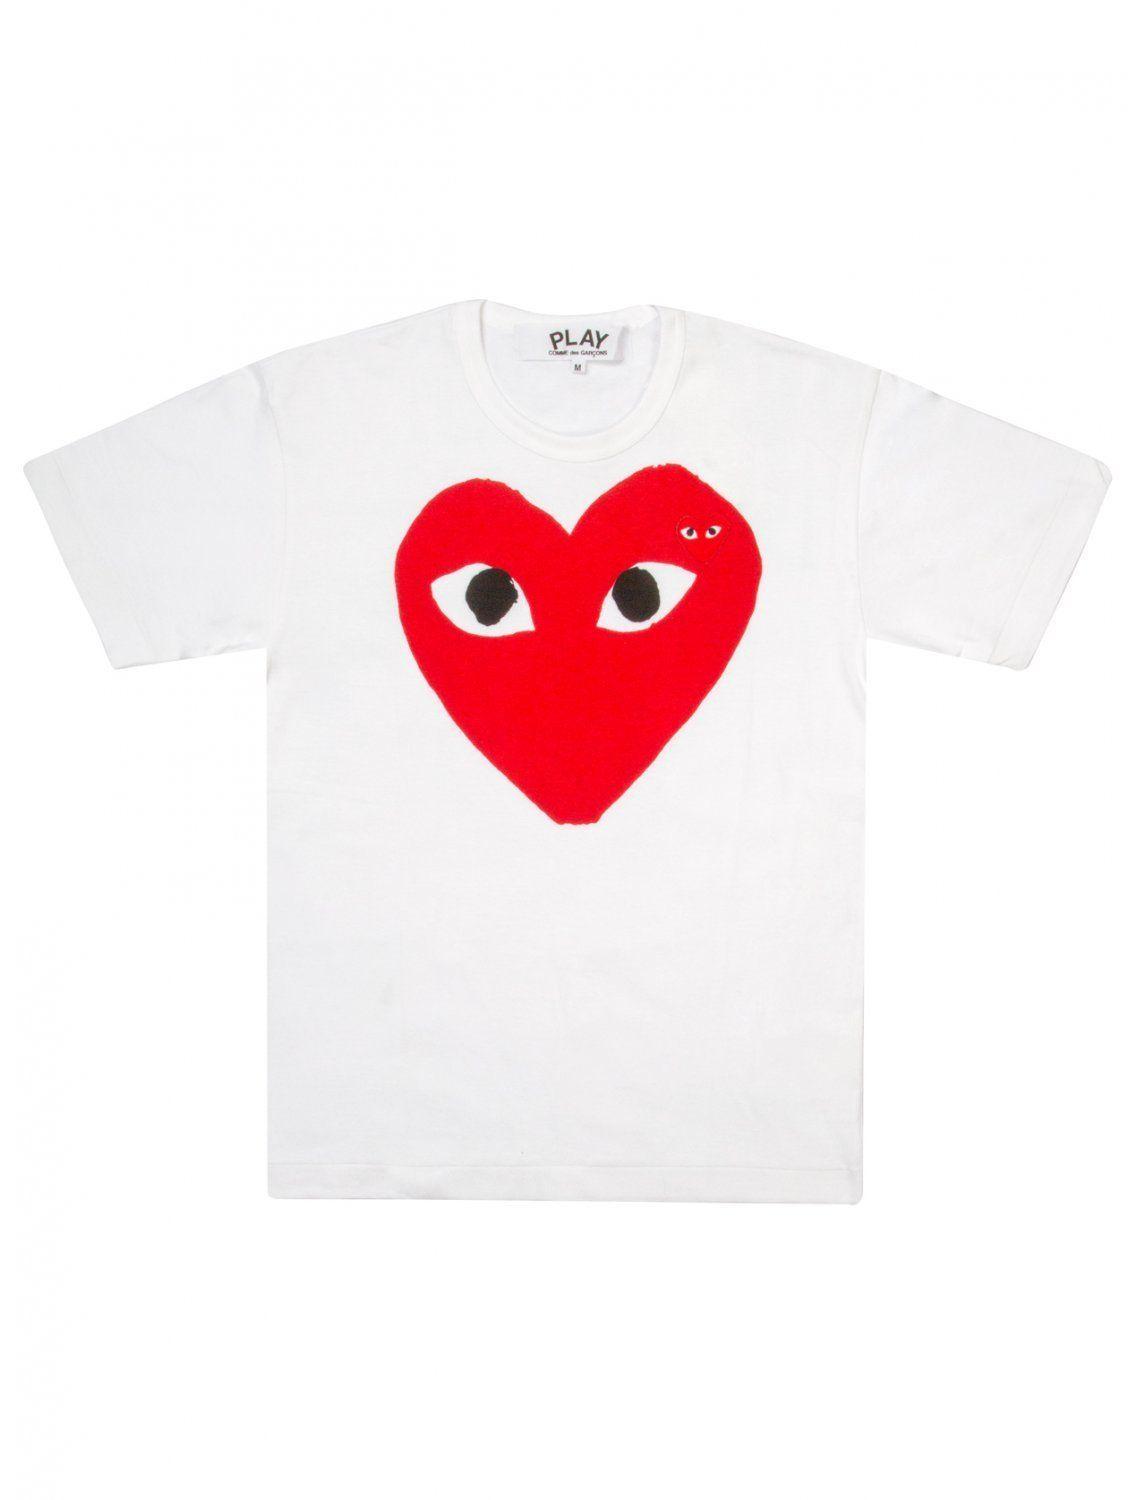 CDG Heart Logo - Comme Des Garcons PLAY | PLAY Mens Red Heart Logo T-Shirt White ...